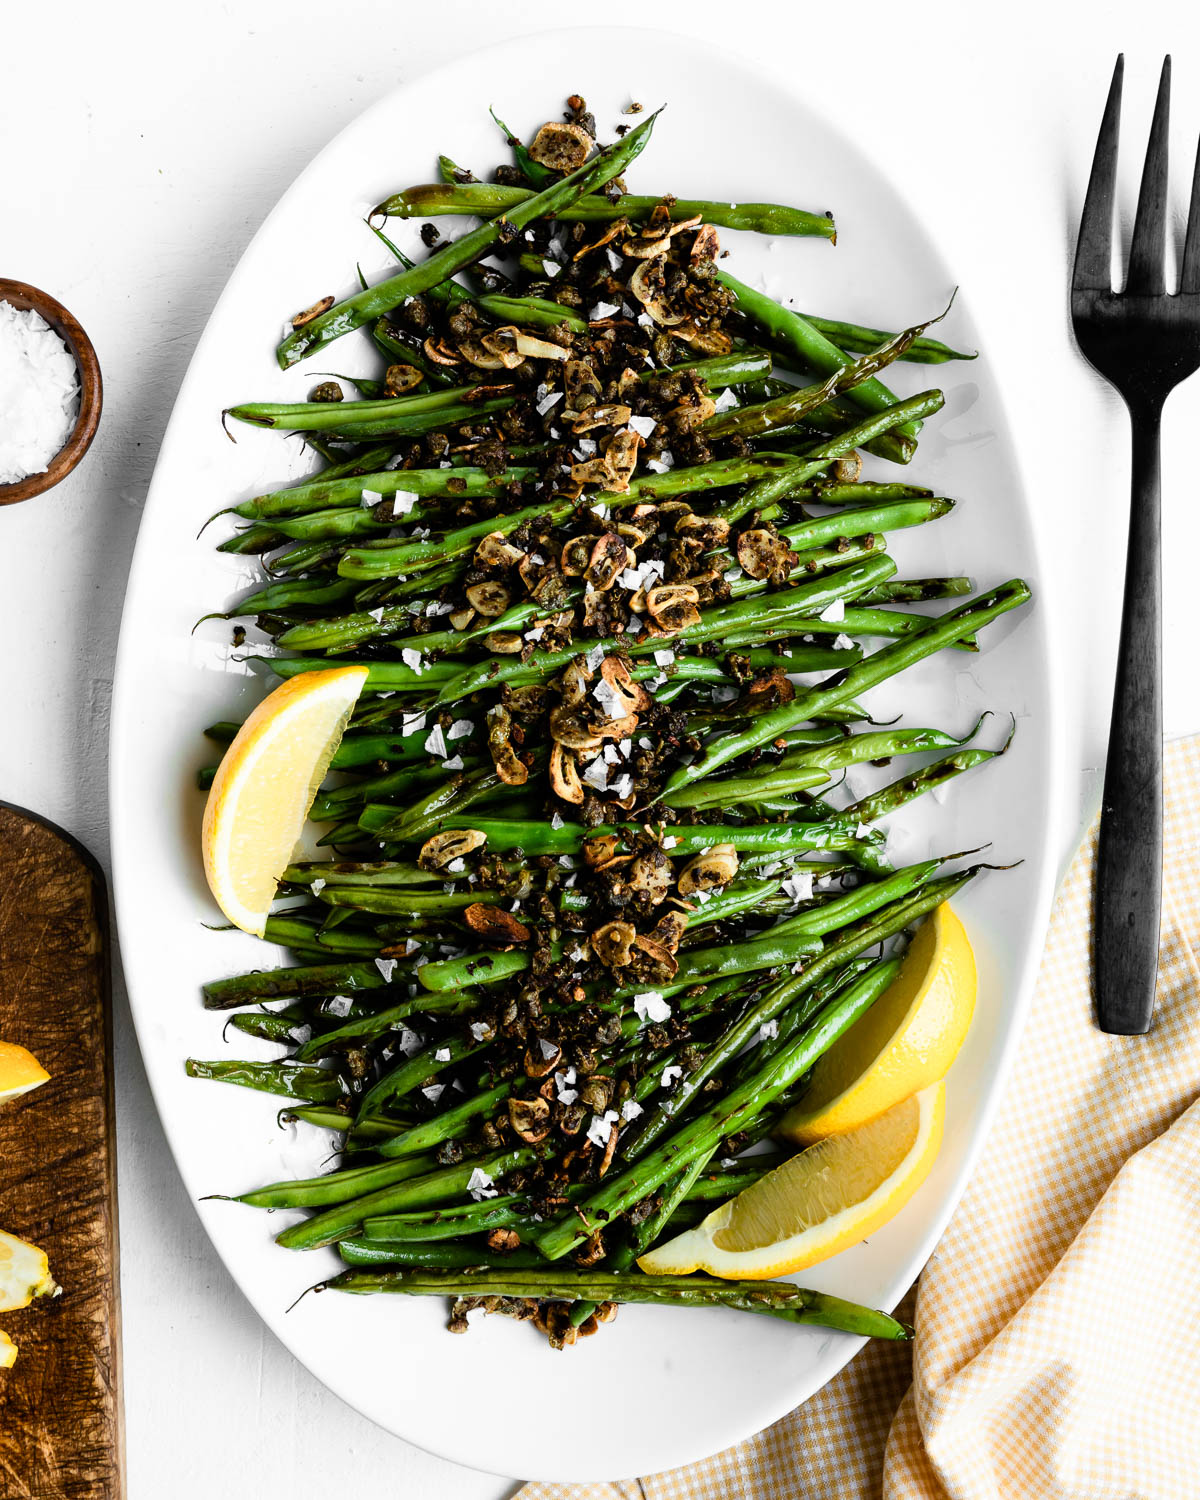 green beans topped with capers, garlic and spices on a white serving tray with lemon wedges.